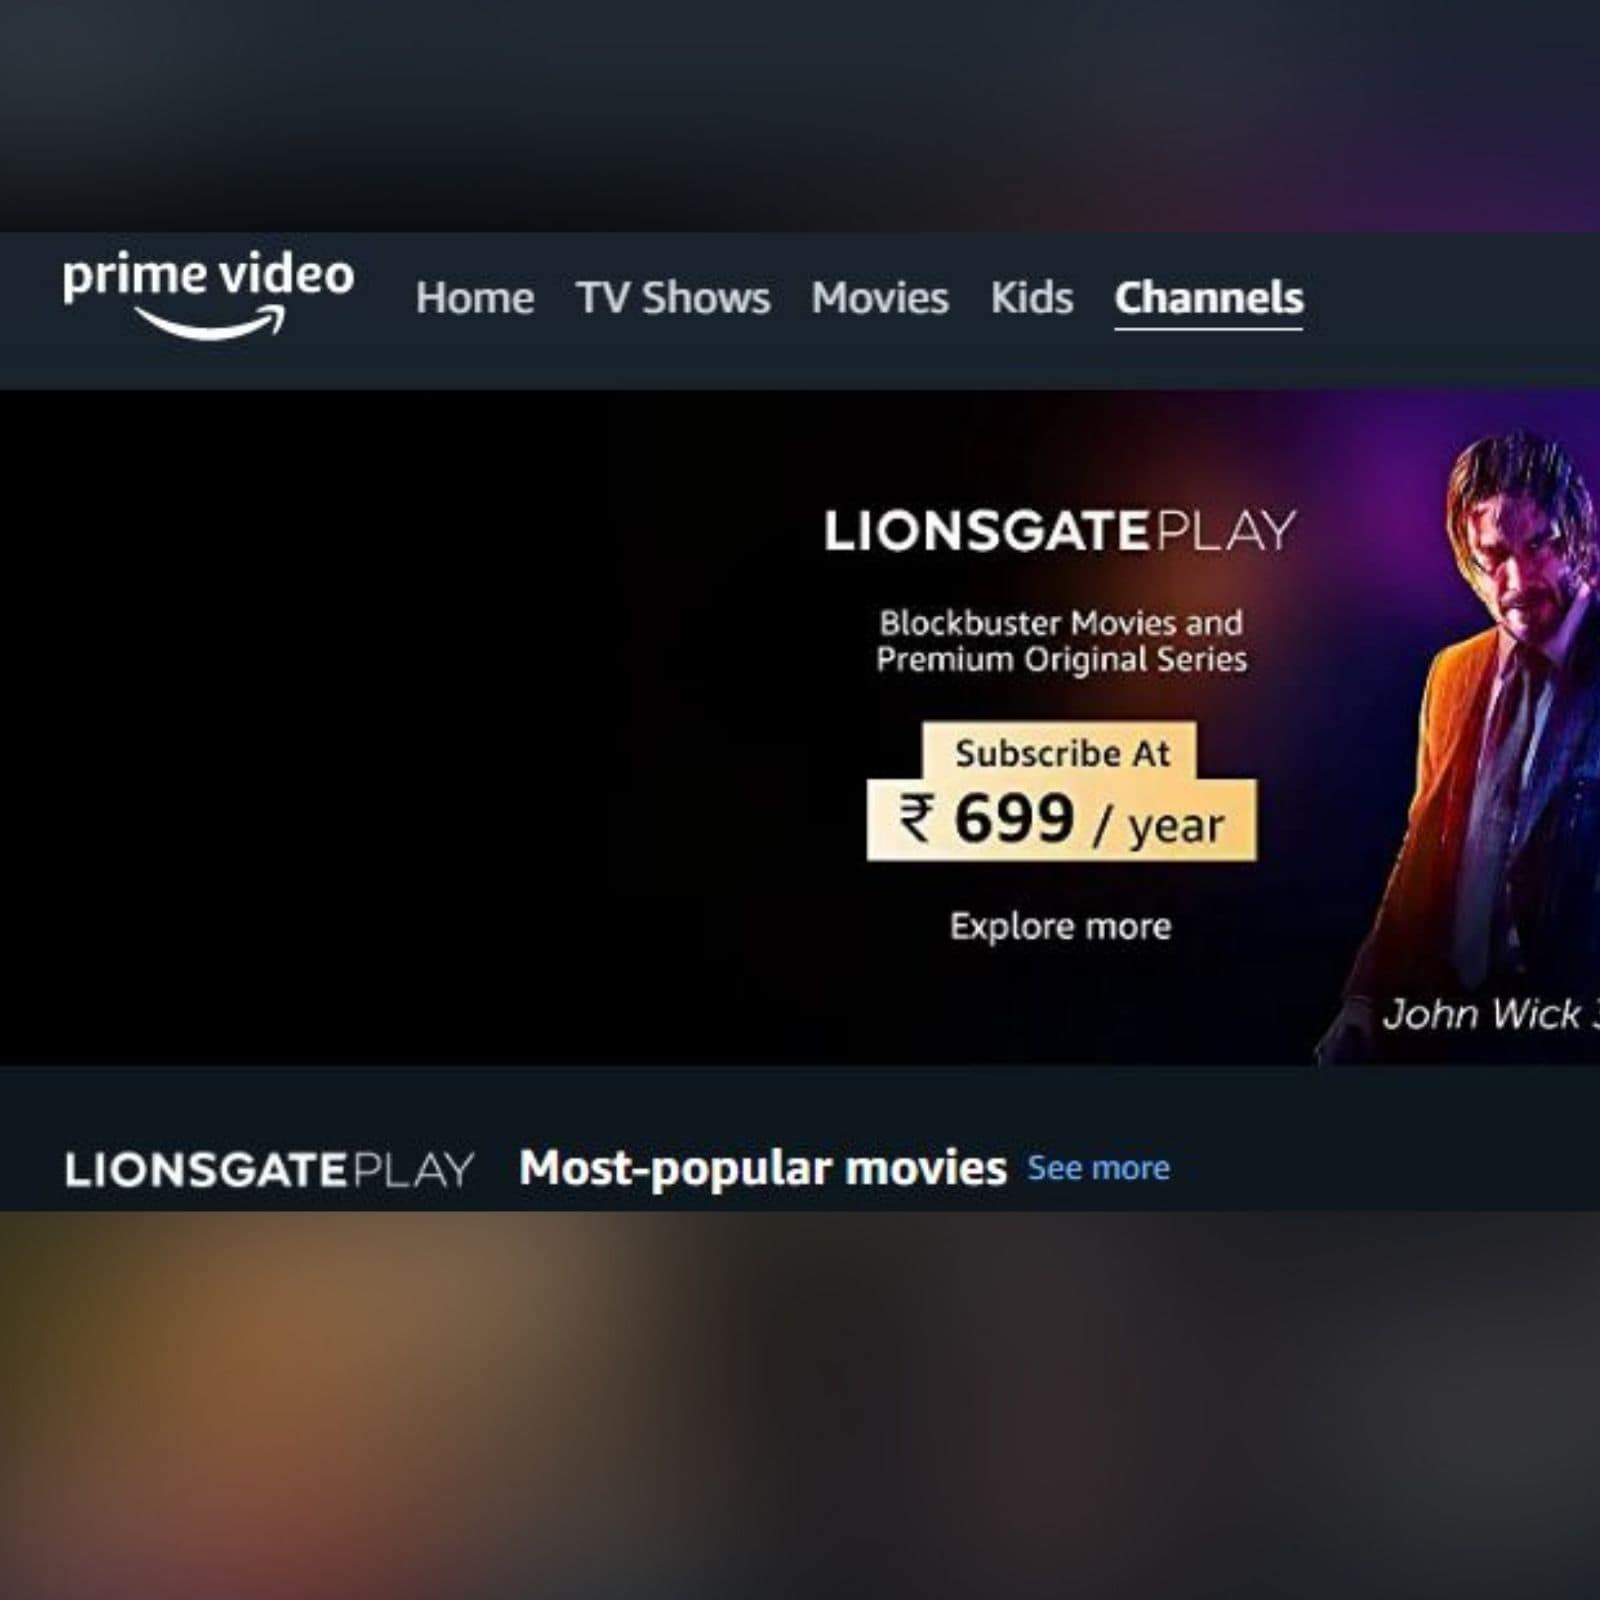 Amazon Prime Video Gets Channels That Brings Content From Other OTT Platforms